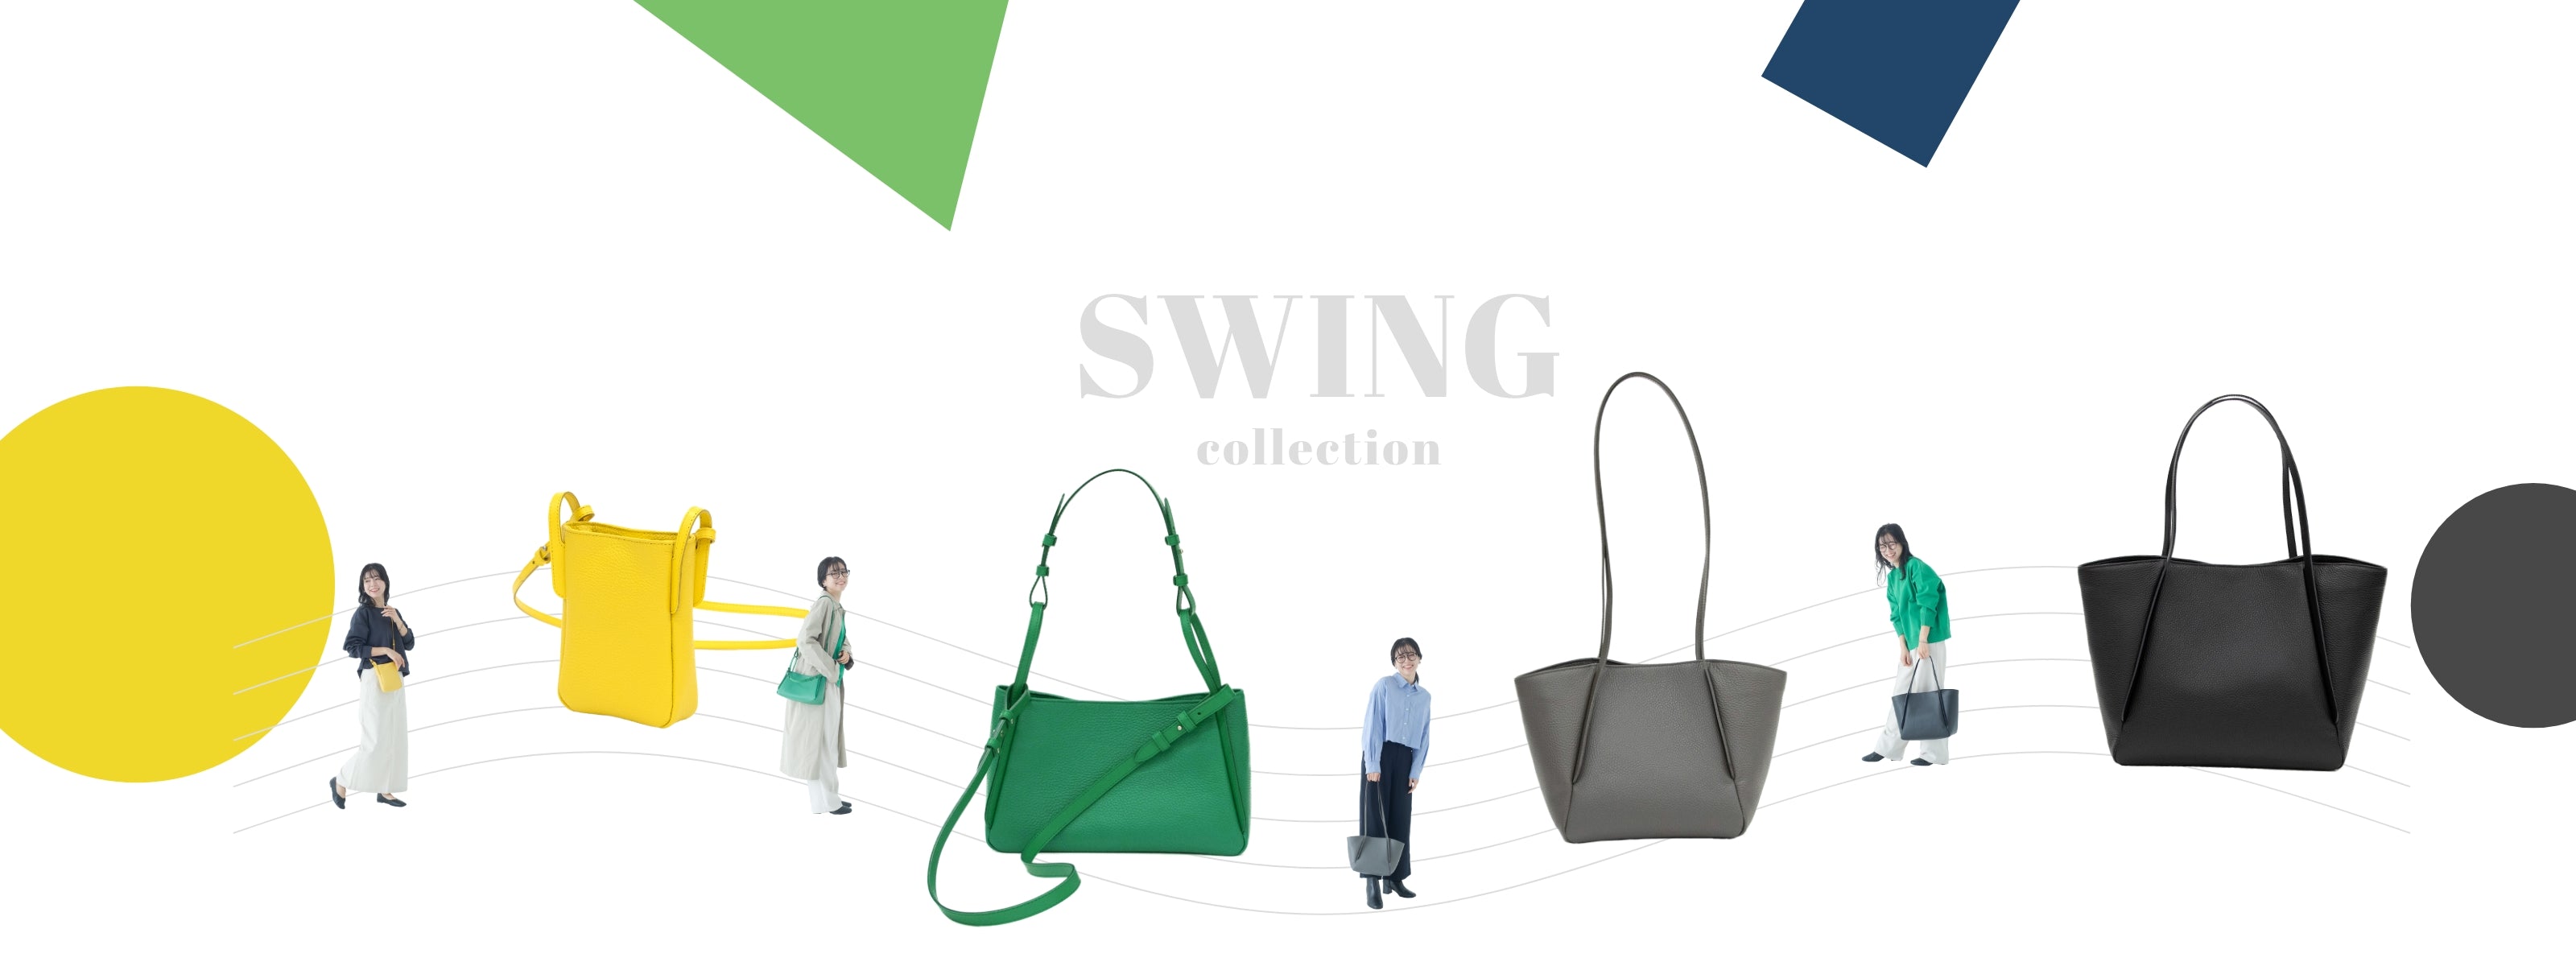 Swing Collection